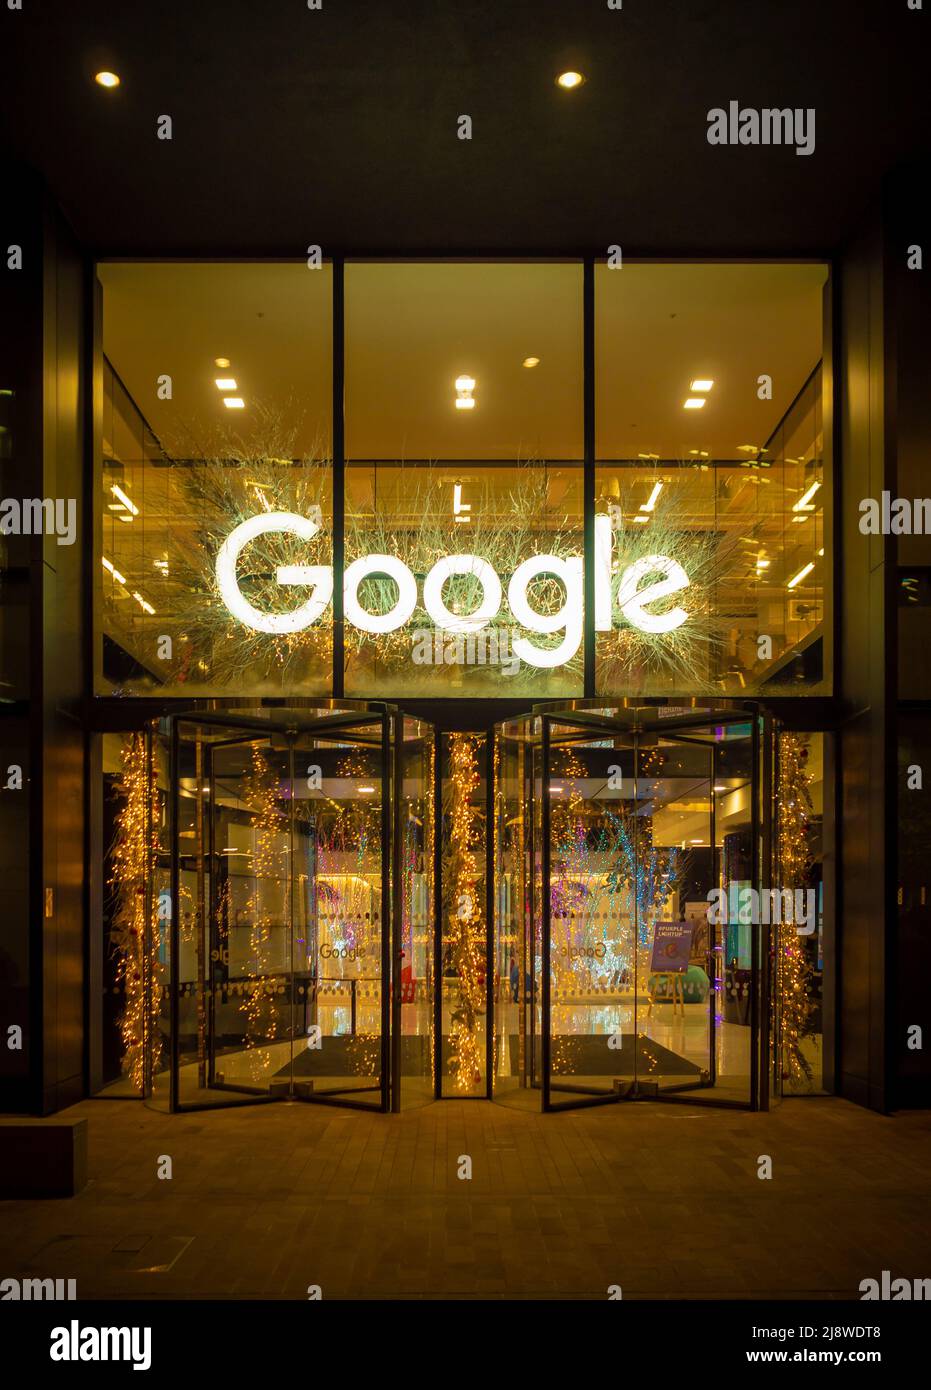 Google offices at night with Christmas decorations, Pancras Square, London, UK. Stock Photo